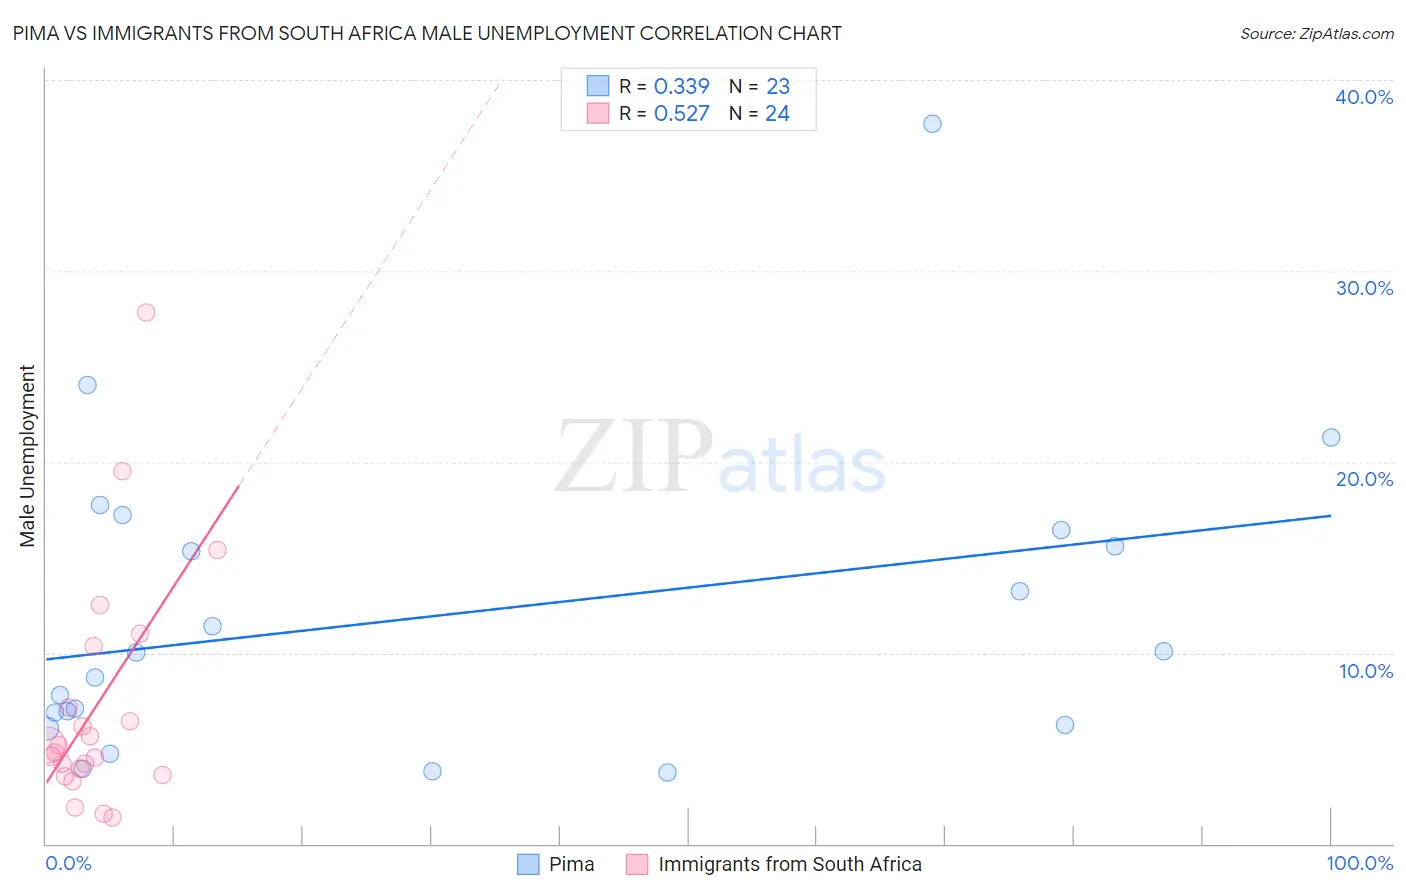 Pima vs Immigrants from South Africa Male Unemployment